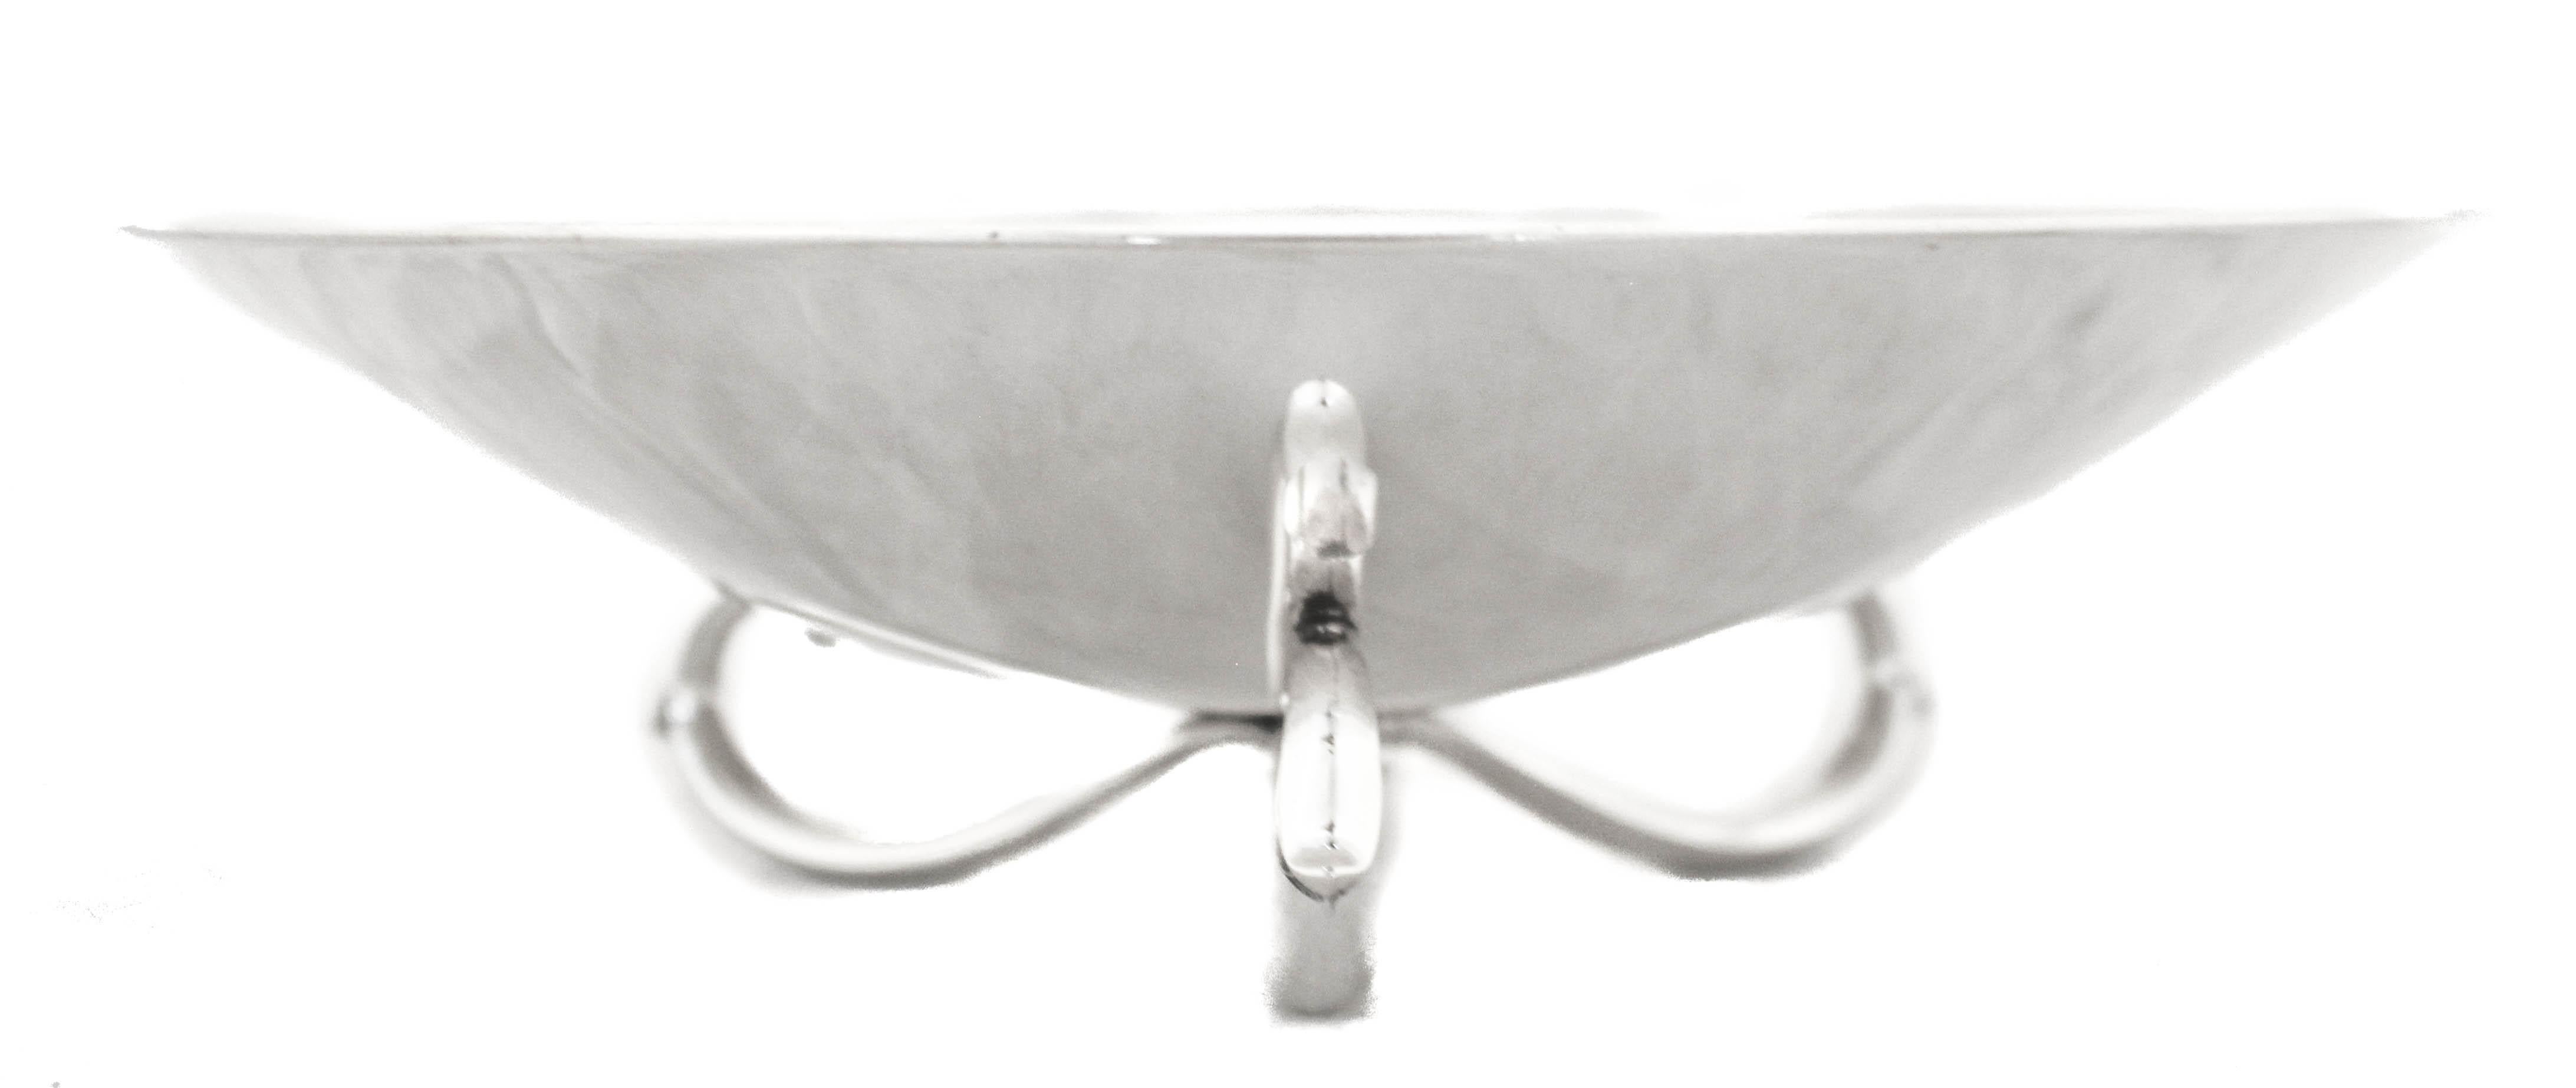 We are happy to offer you this sterling silver bowl by Wallace Silversmiths from the 1940’s. It has a sleek look with a curved three-loop base. Although it was manufactured before the Mid-Century movement it has that Mid-Century look and feel;